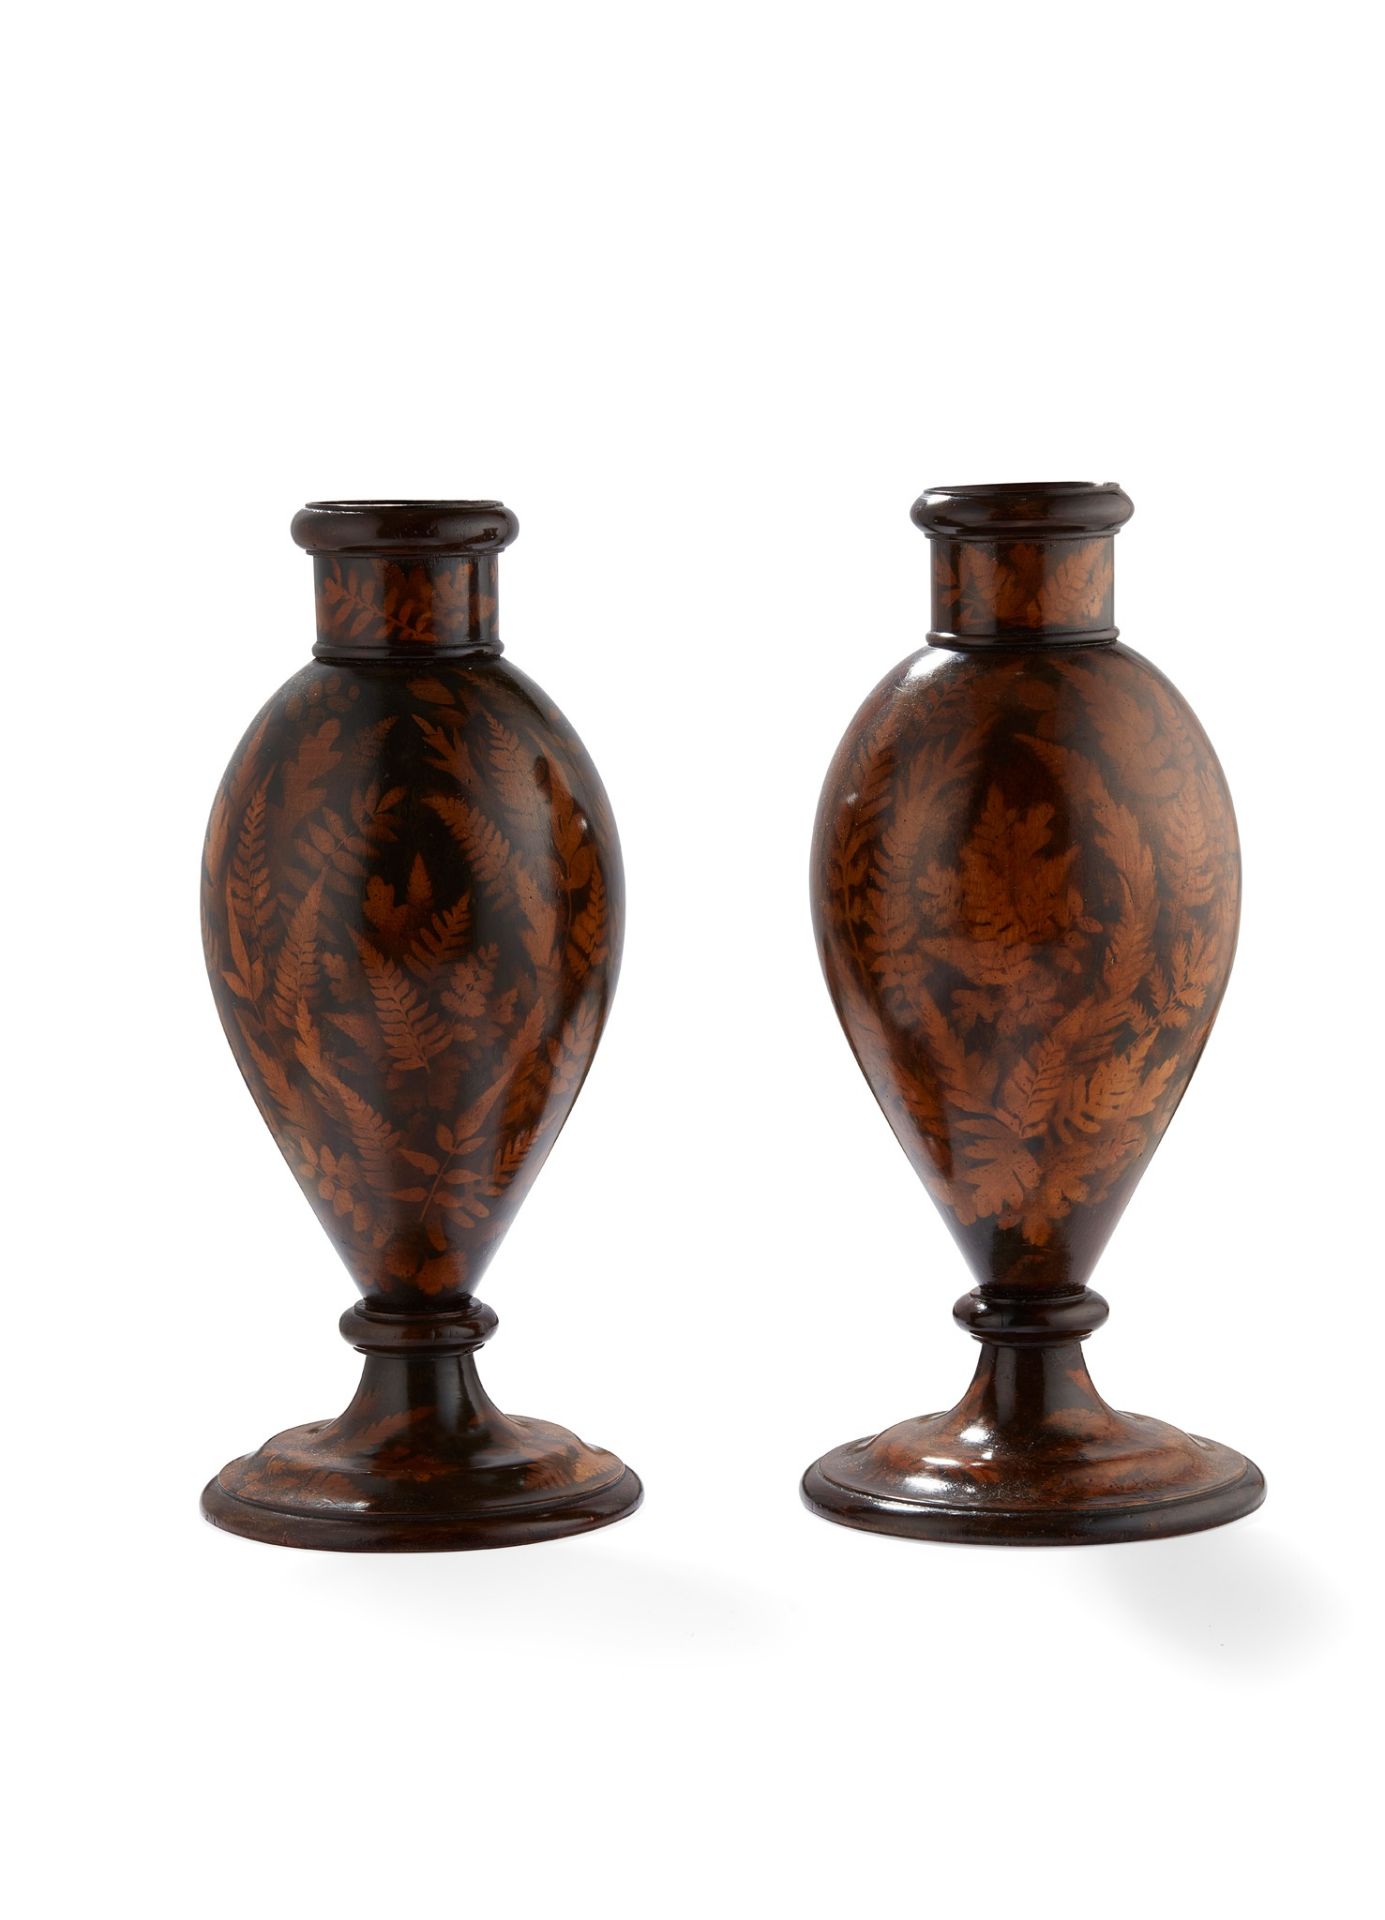 PAIR OF MAUCHLINE 'FERN WARE' VASES LATE 19TH CENTURY